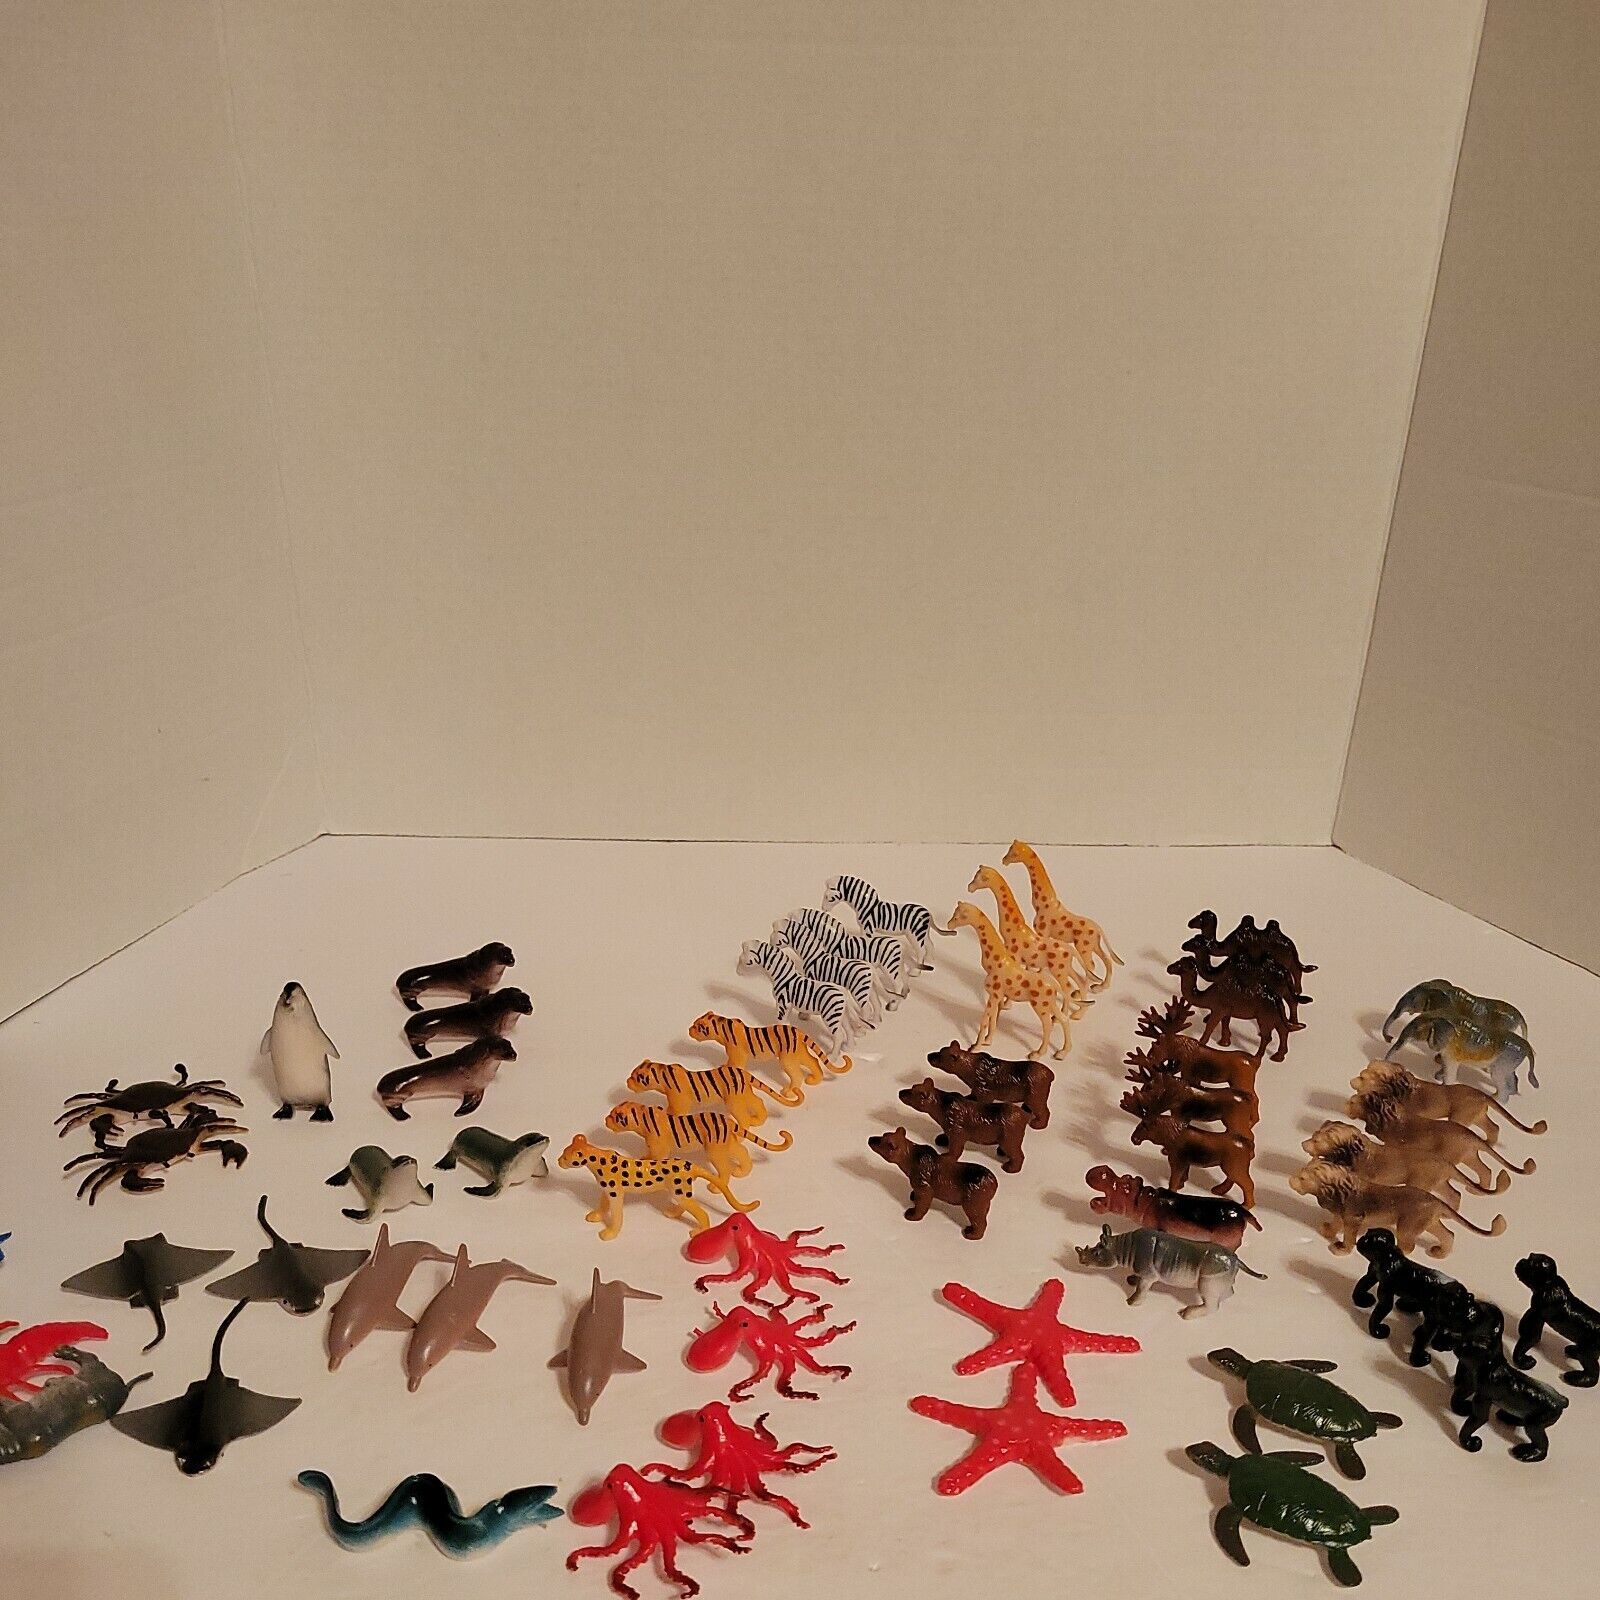 58 Pc. Set Of Miniature Toy Wild Animals And Sea Life In Canister | eBay